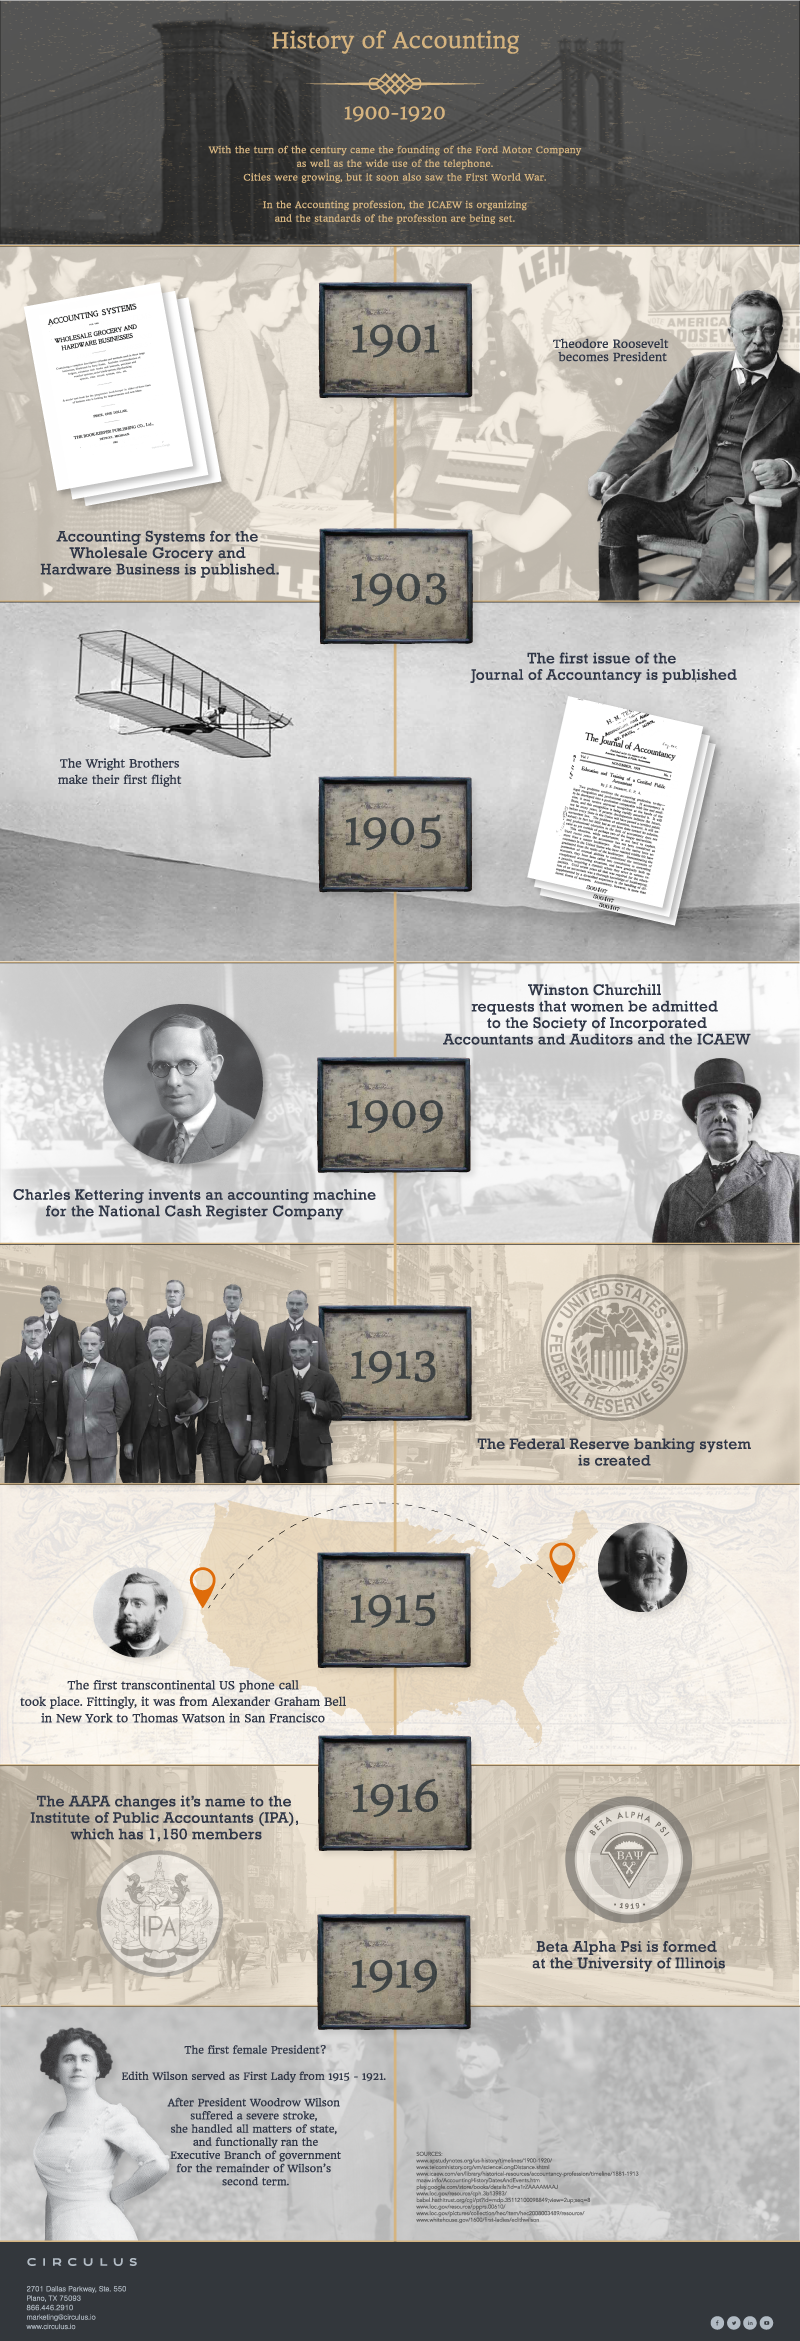 Infographic History Of Accounting 1900 1920 Circulus Io